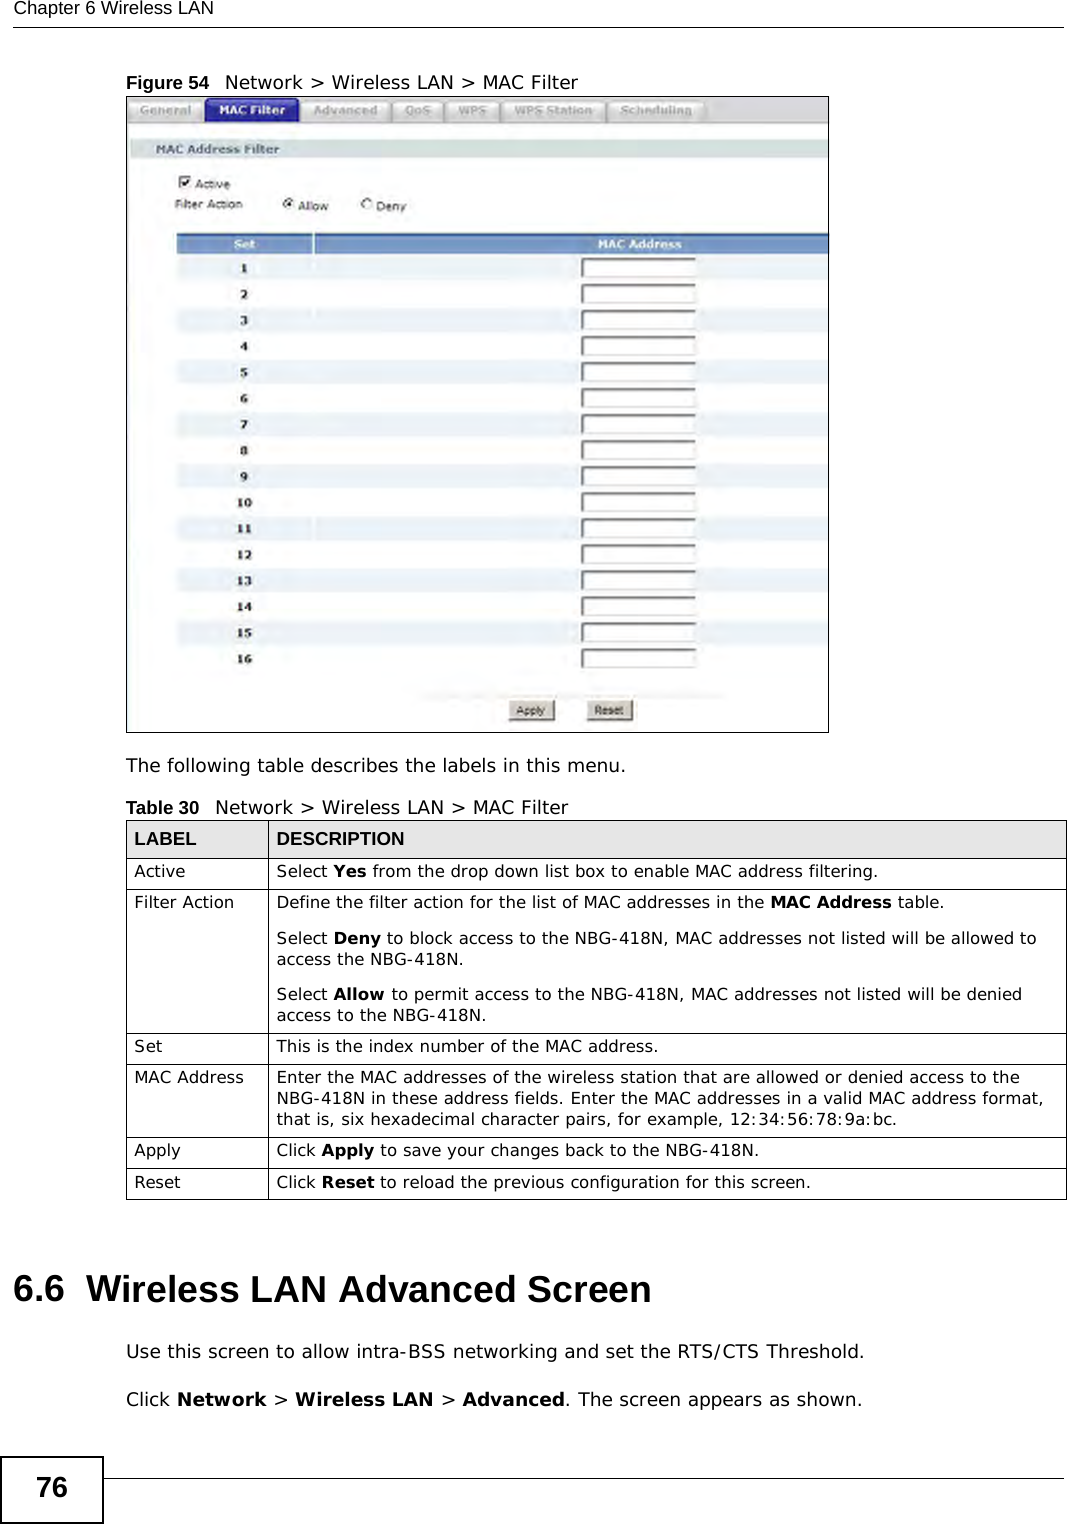 Chapter 6 Wireless LAN76Figure 54   Network &gt; Wireless LAN &gt; MAC FilterThe following table describes the labels in this menu.6.6  Wireless LAN Advanced ScreenUse this screen to allow intra-BSS networking and set the RTS/CTS Threshold.Click Network &gt; Wireless LAN &gt; Advanced. The screen appears as shown.Table 30   Network &gt; Wireless LAN &gt; MAC FilterLABEL DESCRIPTIONActive Select Yes from the drop down list box to enable MAC address filtering.Filter Action  Define the filter action for the list of MAC addresses in the MAC Address table. Select Deny to block access to the NBG-418N, MAC addresses not listed will be allowed to access the NBG-418N. Select Allow to permit access to the NBG-418N, MAC addresses not listed will be denied access to the NBG-418N. SetThis is the index number of the MAC address.MAC Address Enter the MAC addresses of the wireless station that are allowed or denied access to the NBG-418N in these address fields. Enter the MAC addresses in a valid MAC address format, that is, six hexadecimal character pairs, for example, 12:34:56:78:9a:bc.Apply Click Apply to save your changes back to the NBG-418N.Reset Click Reset to reload the previous configuration for this screen.